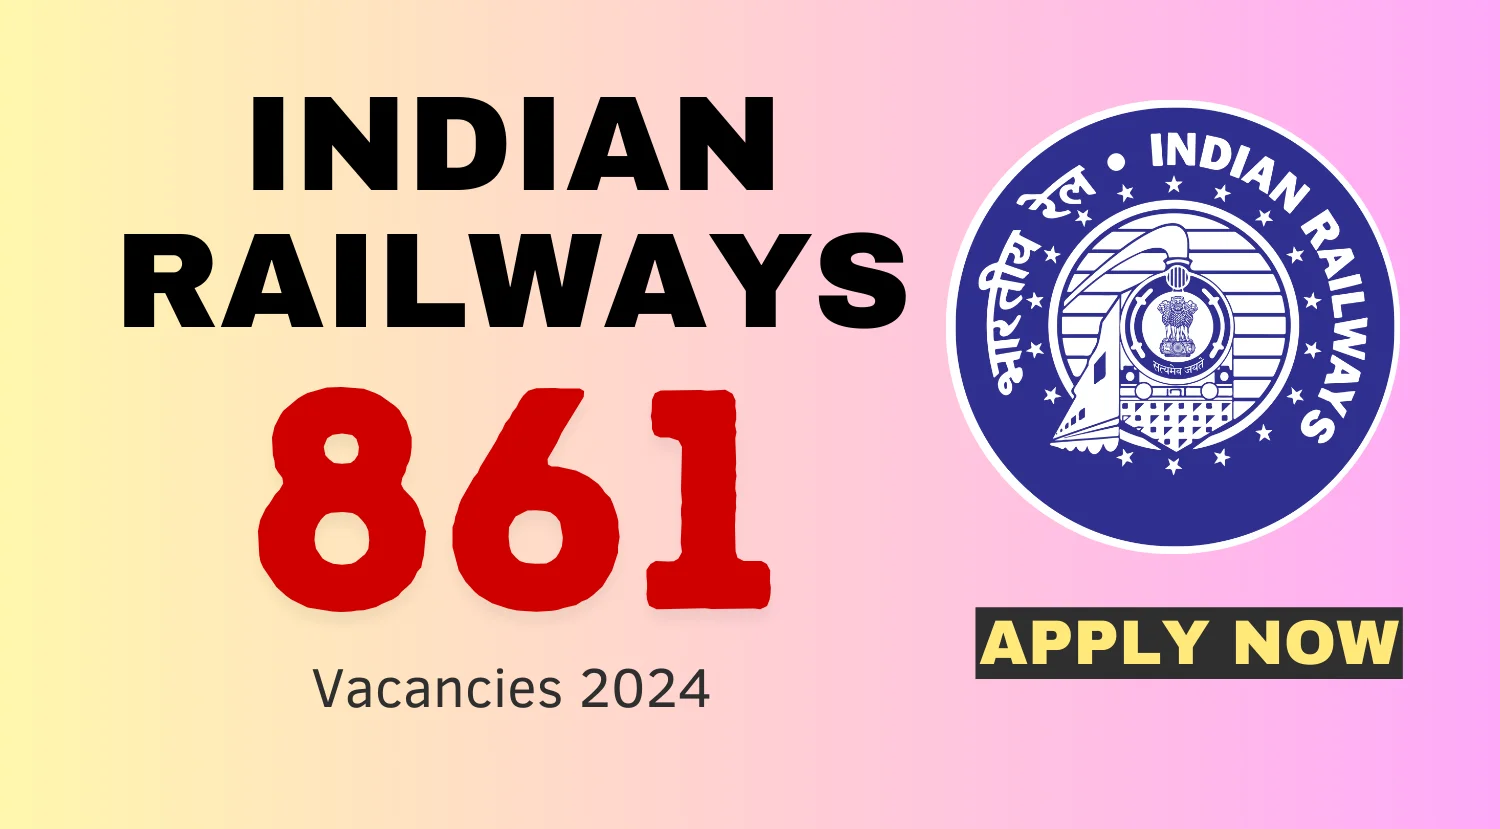 Indian Railways is offering mega opportunities, apply today for 861 posts